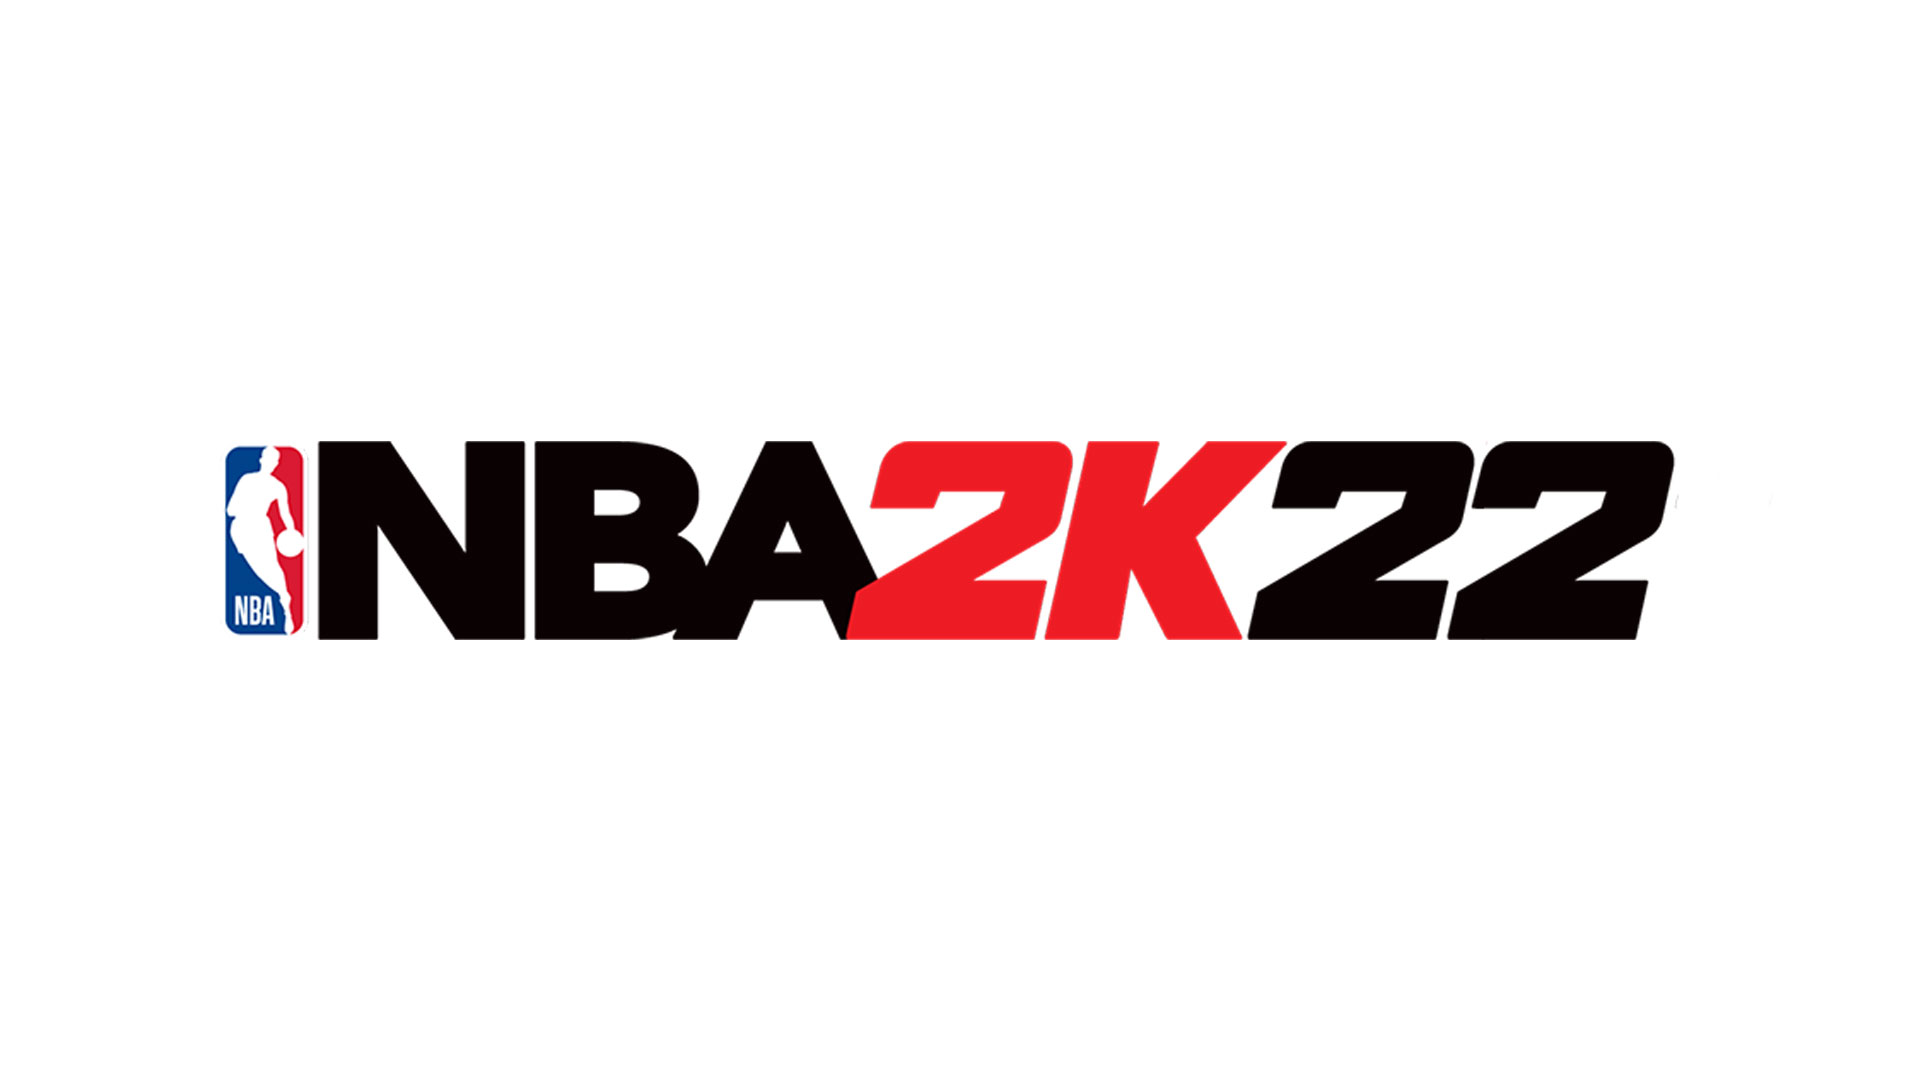 NBA 2K22 release date, cover athletes, leaks, and more